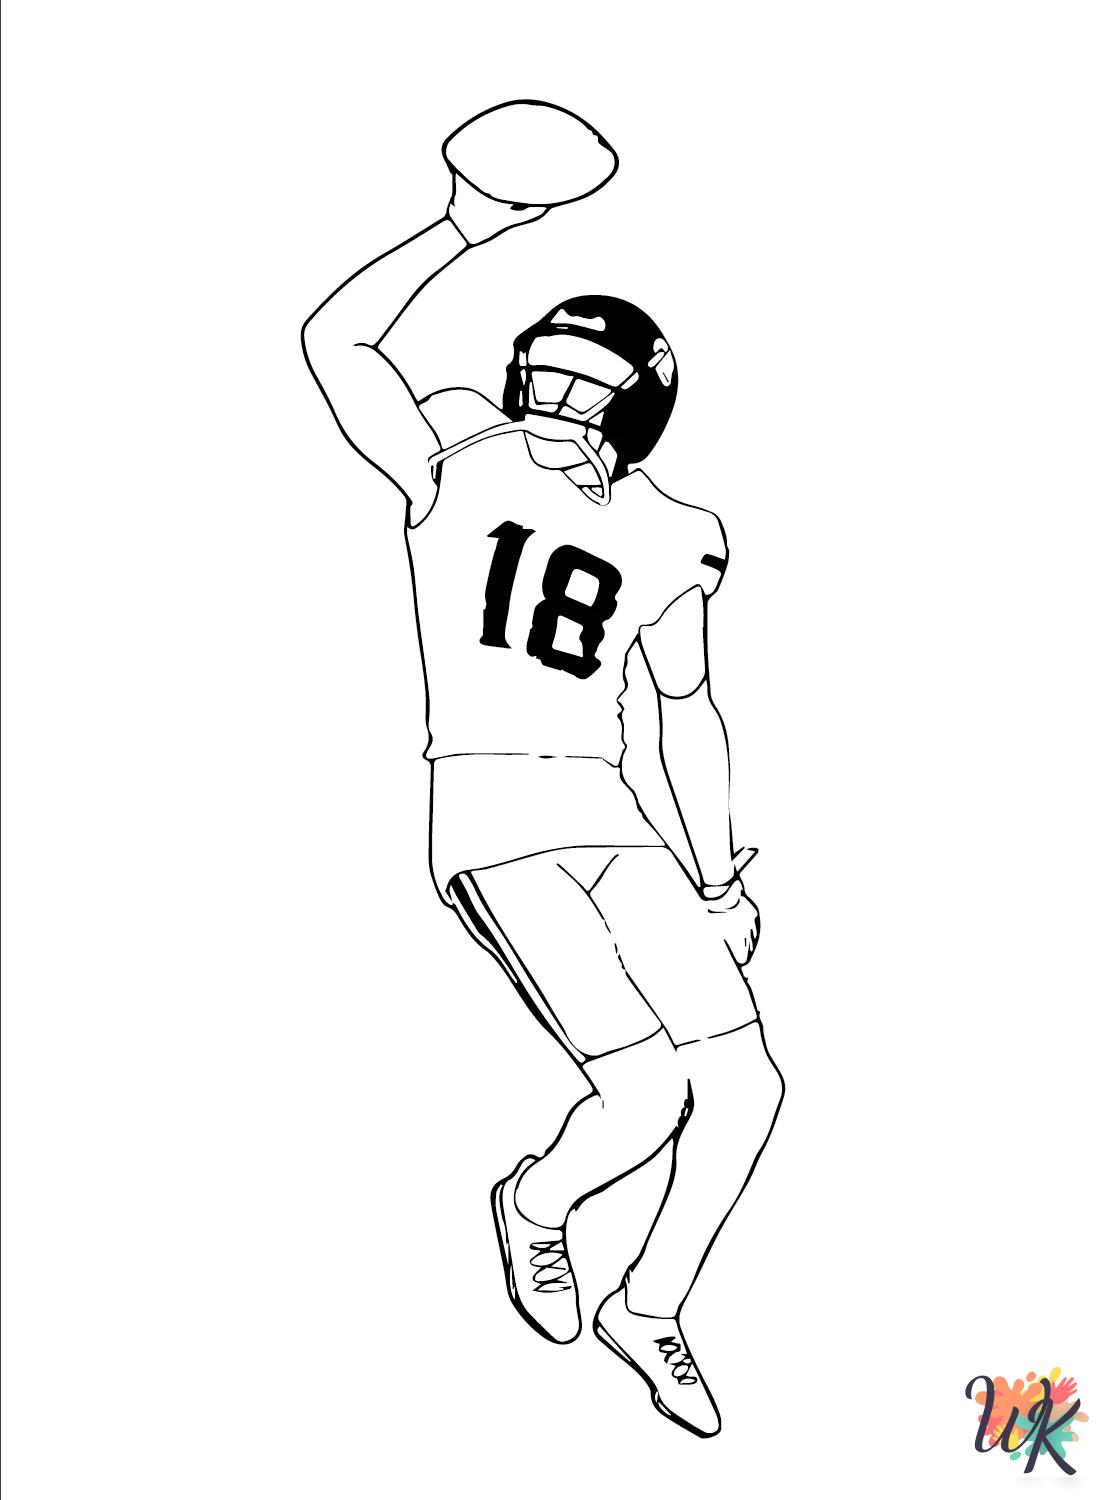 Justin Jefferson coloring pages to print